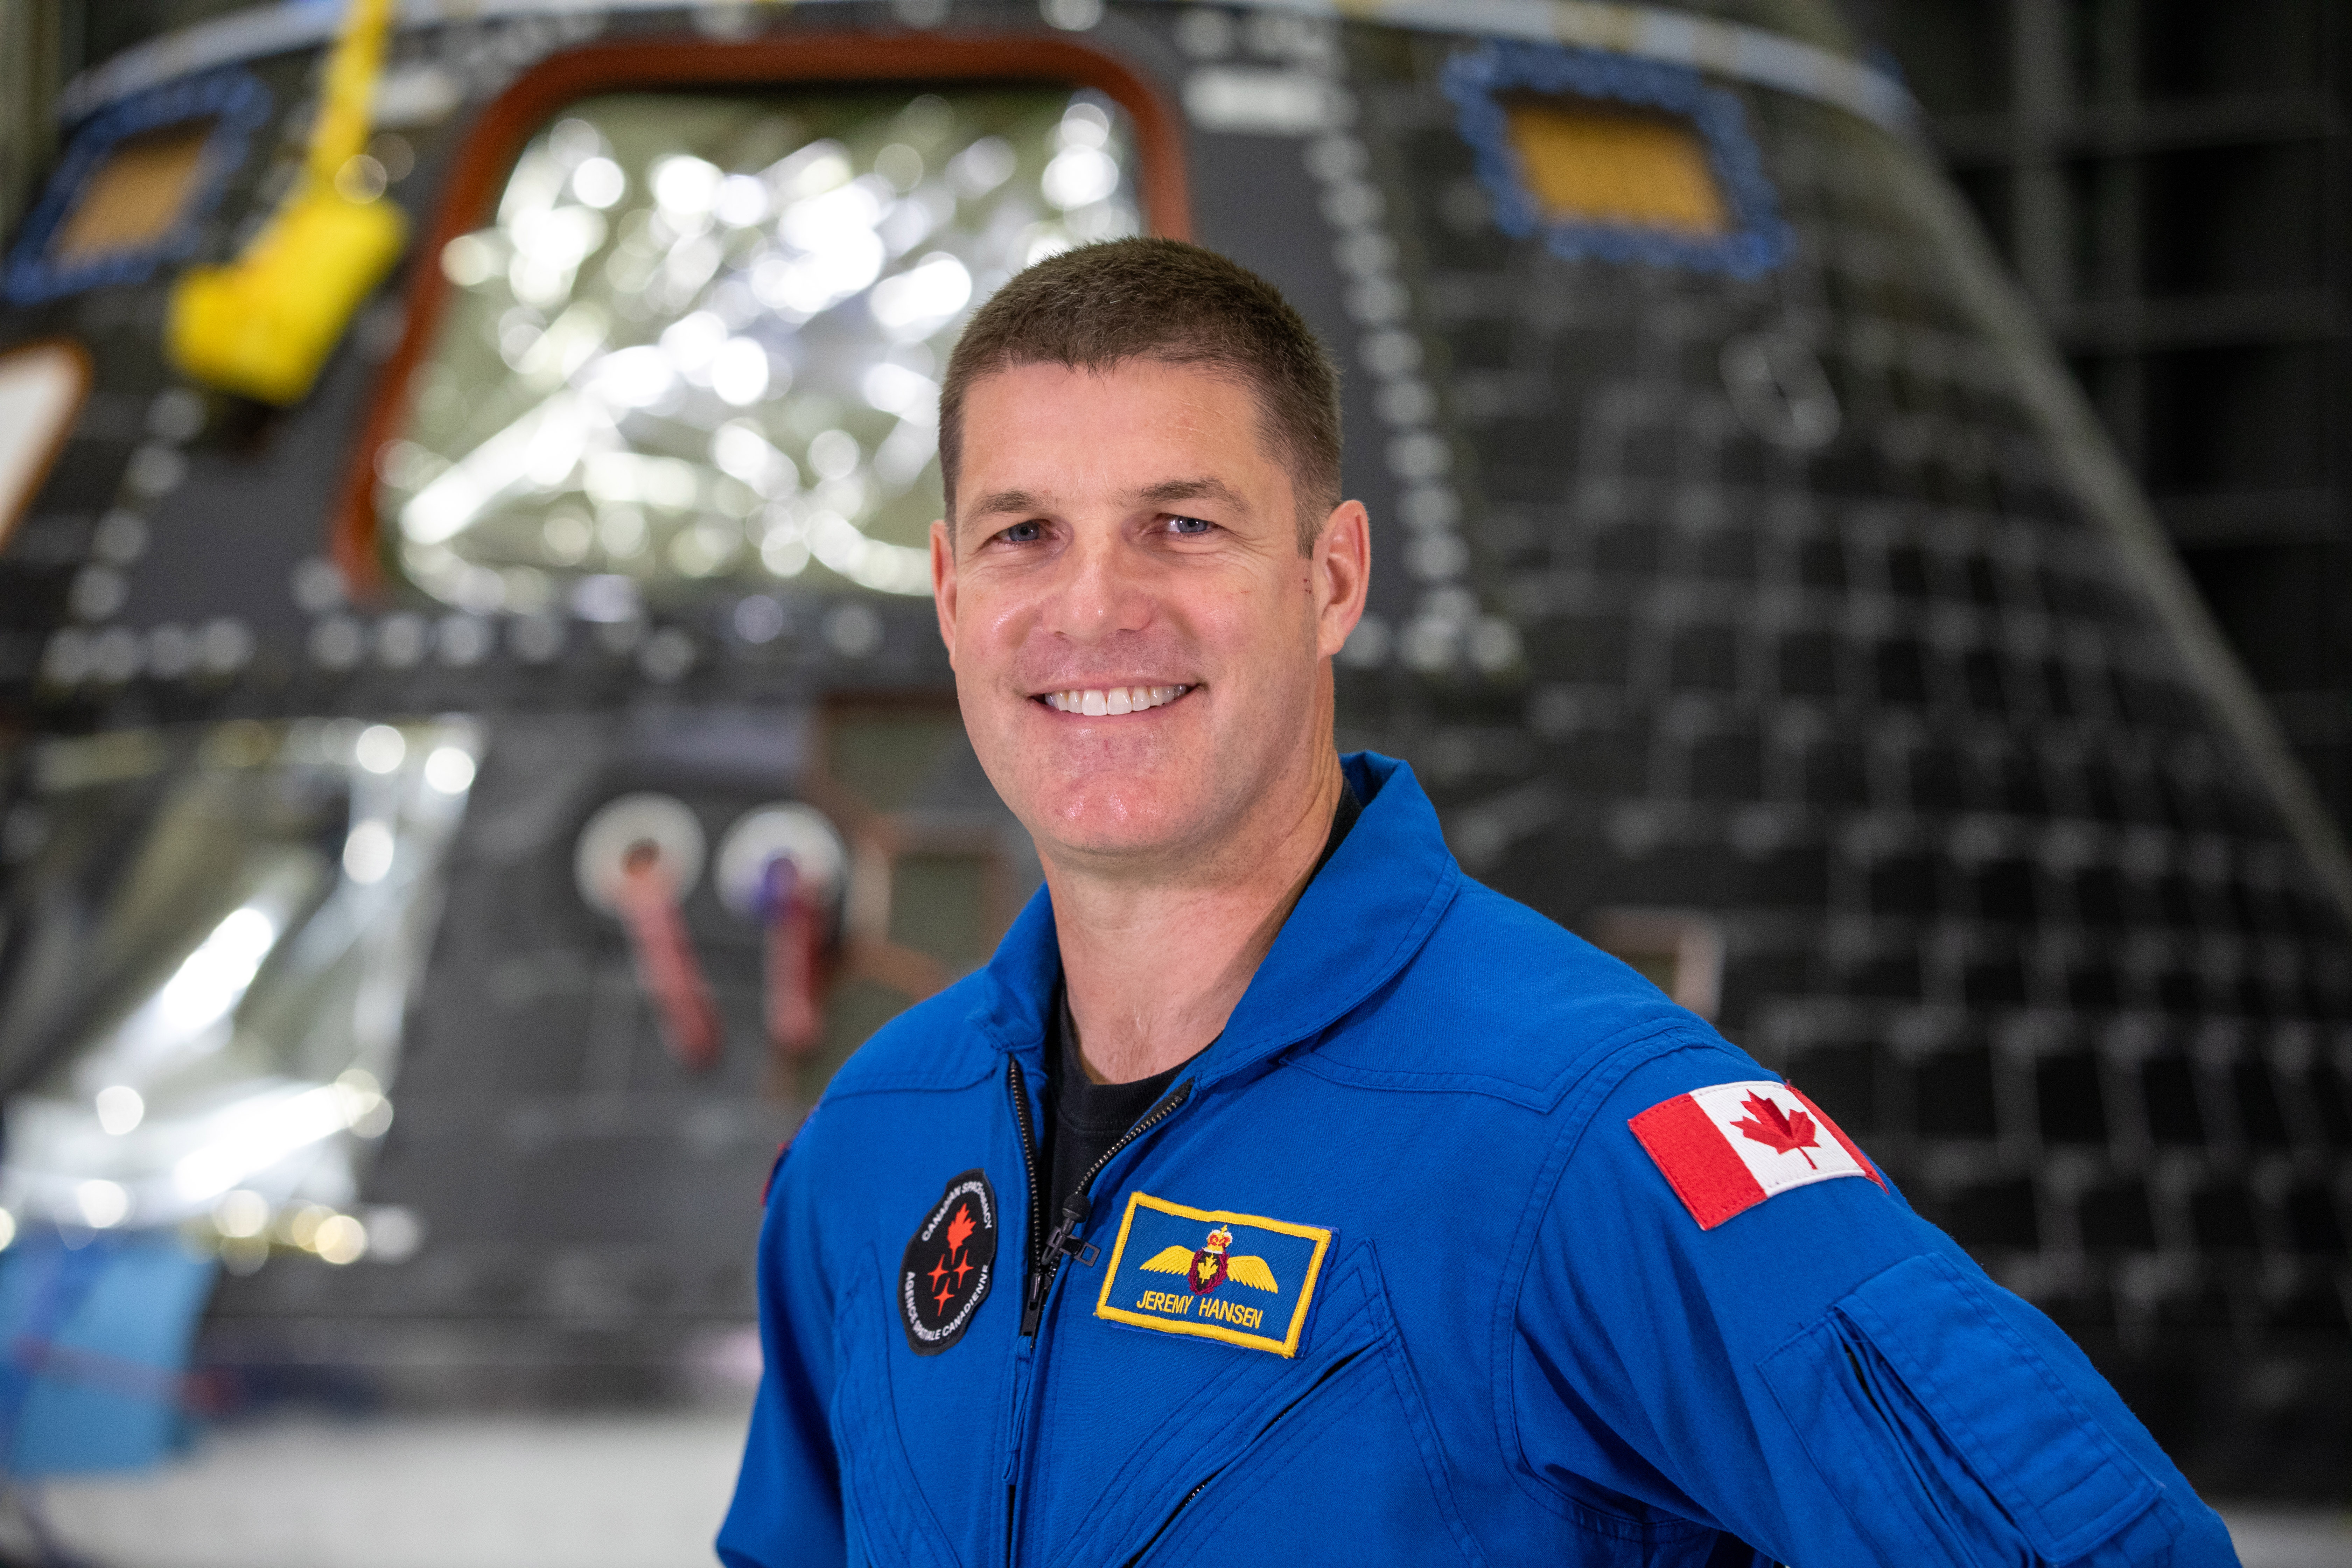 ‘Pushing humanity’: Canadian astronaut visits Regina ahead of trip to the moon